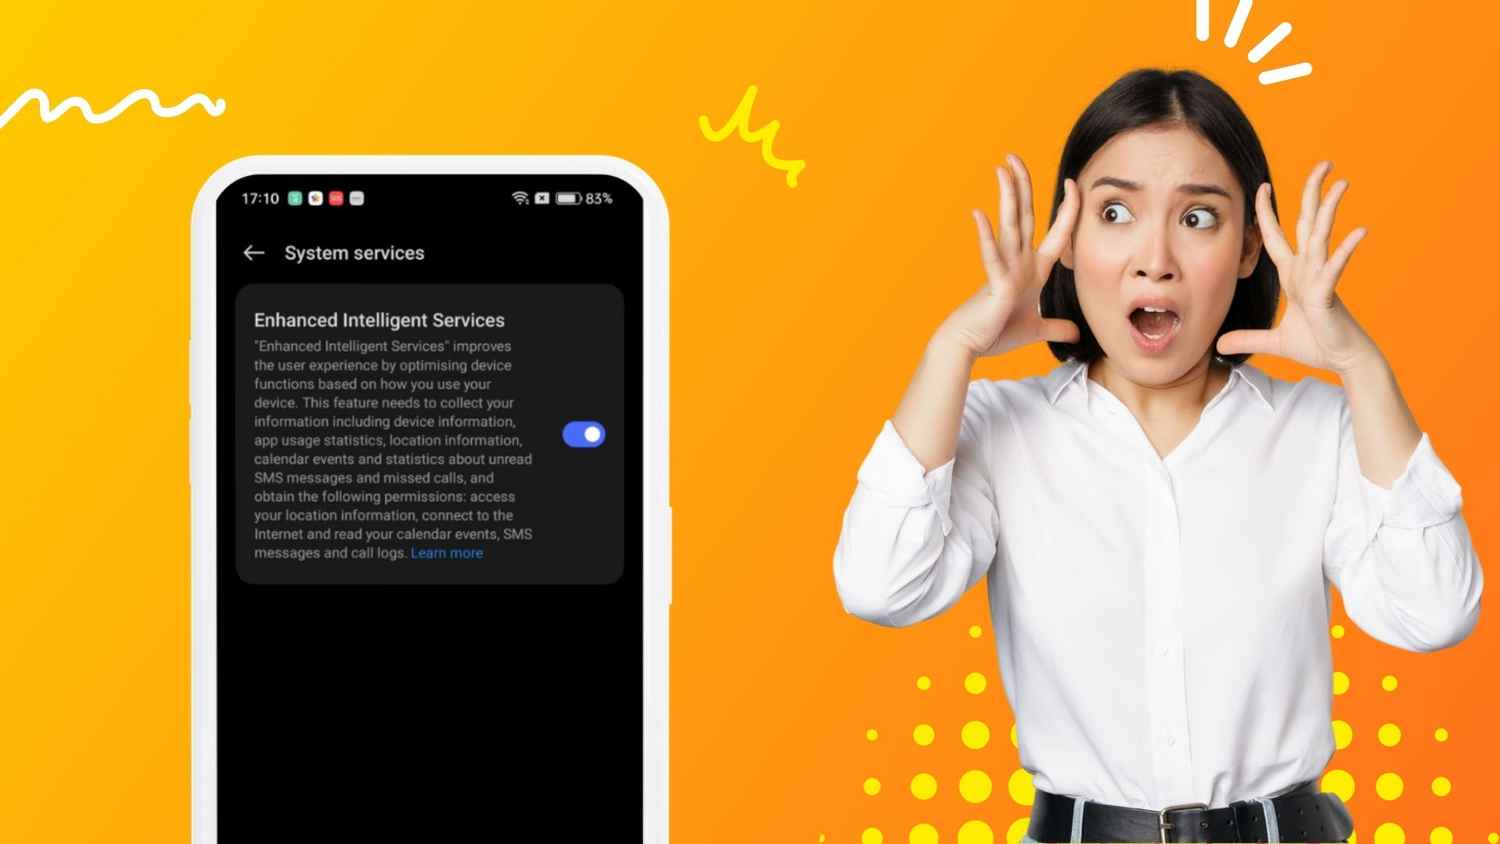 Realme sets the record straight on data collection concerns for its phones